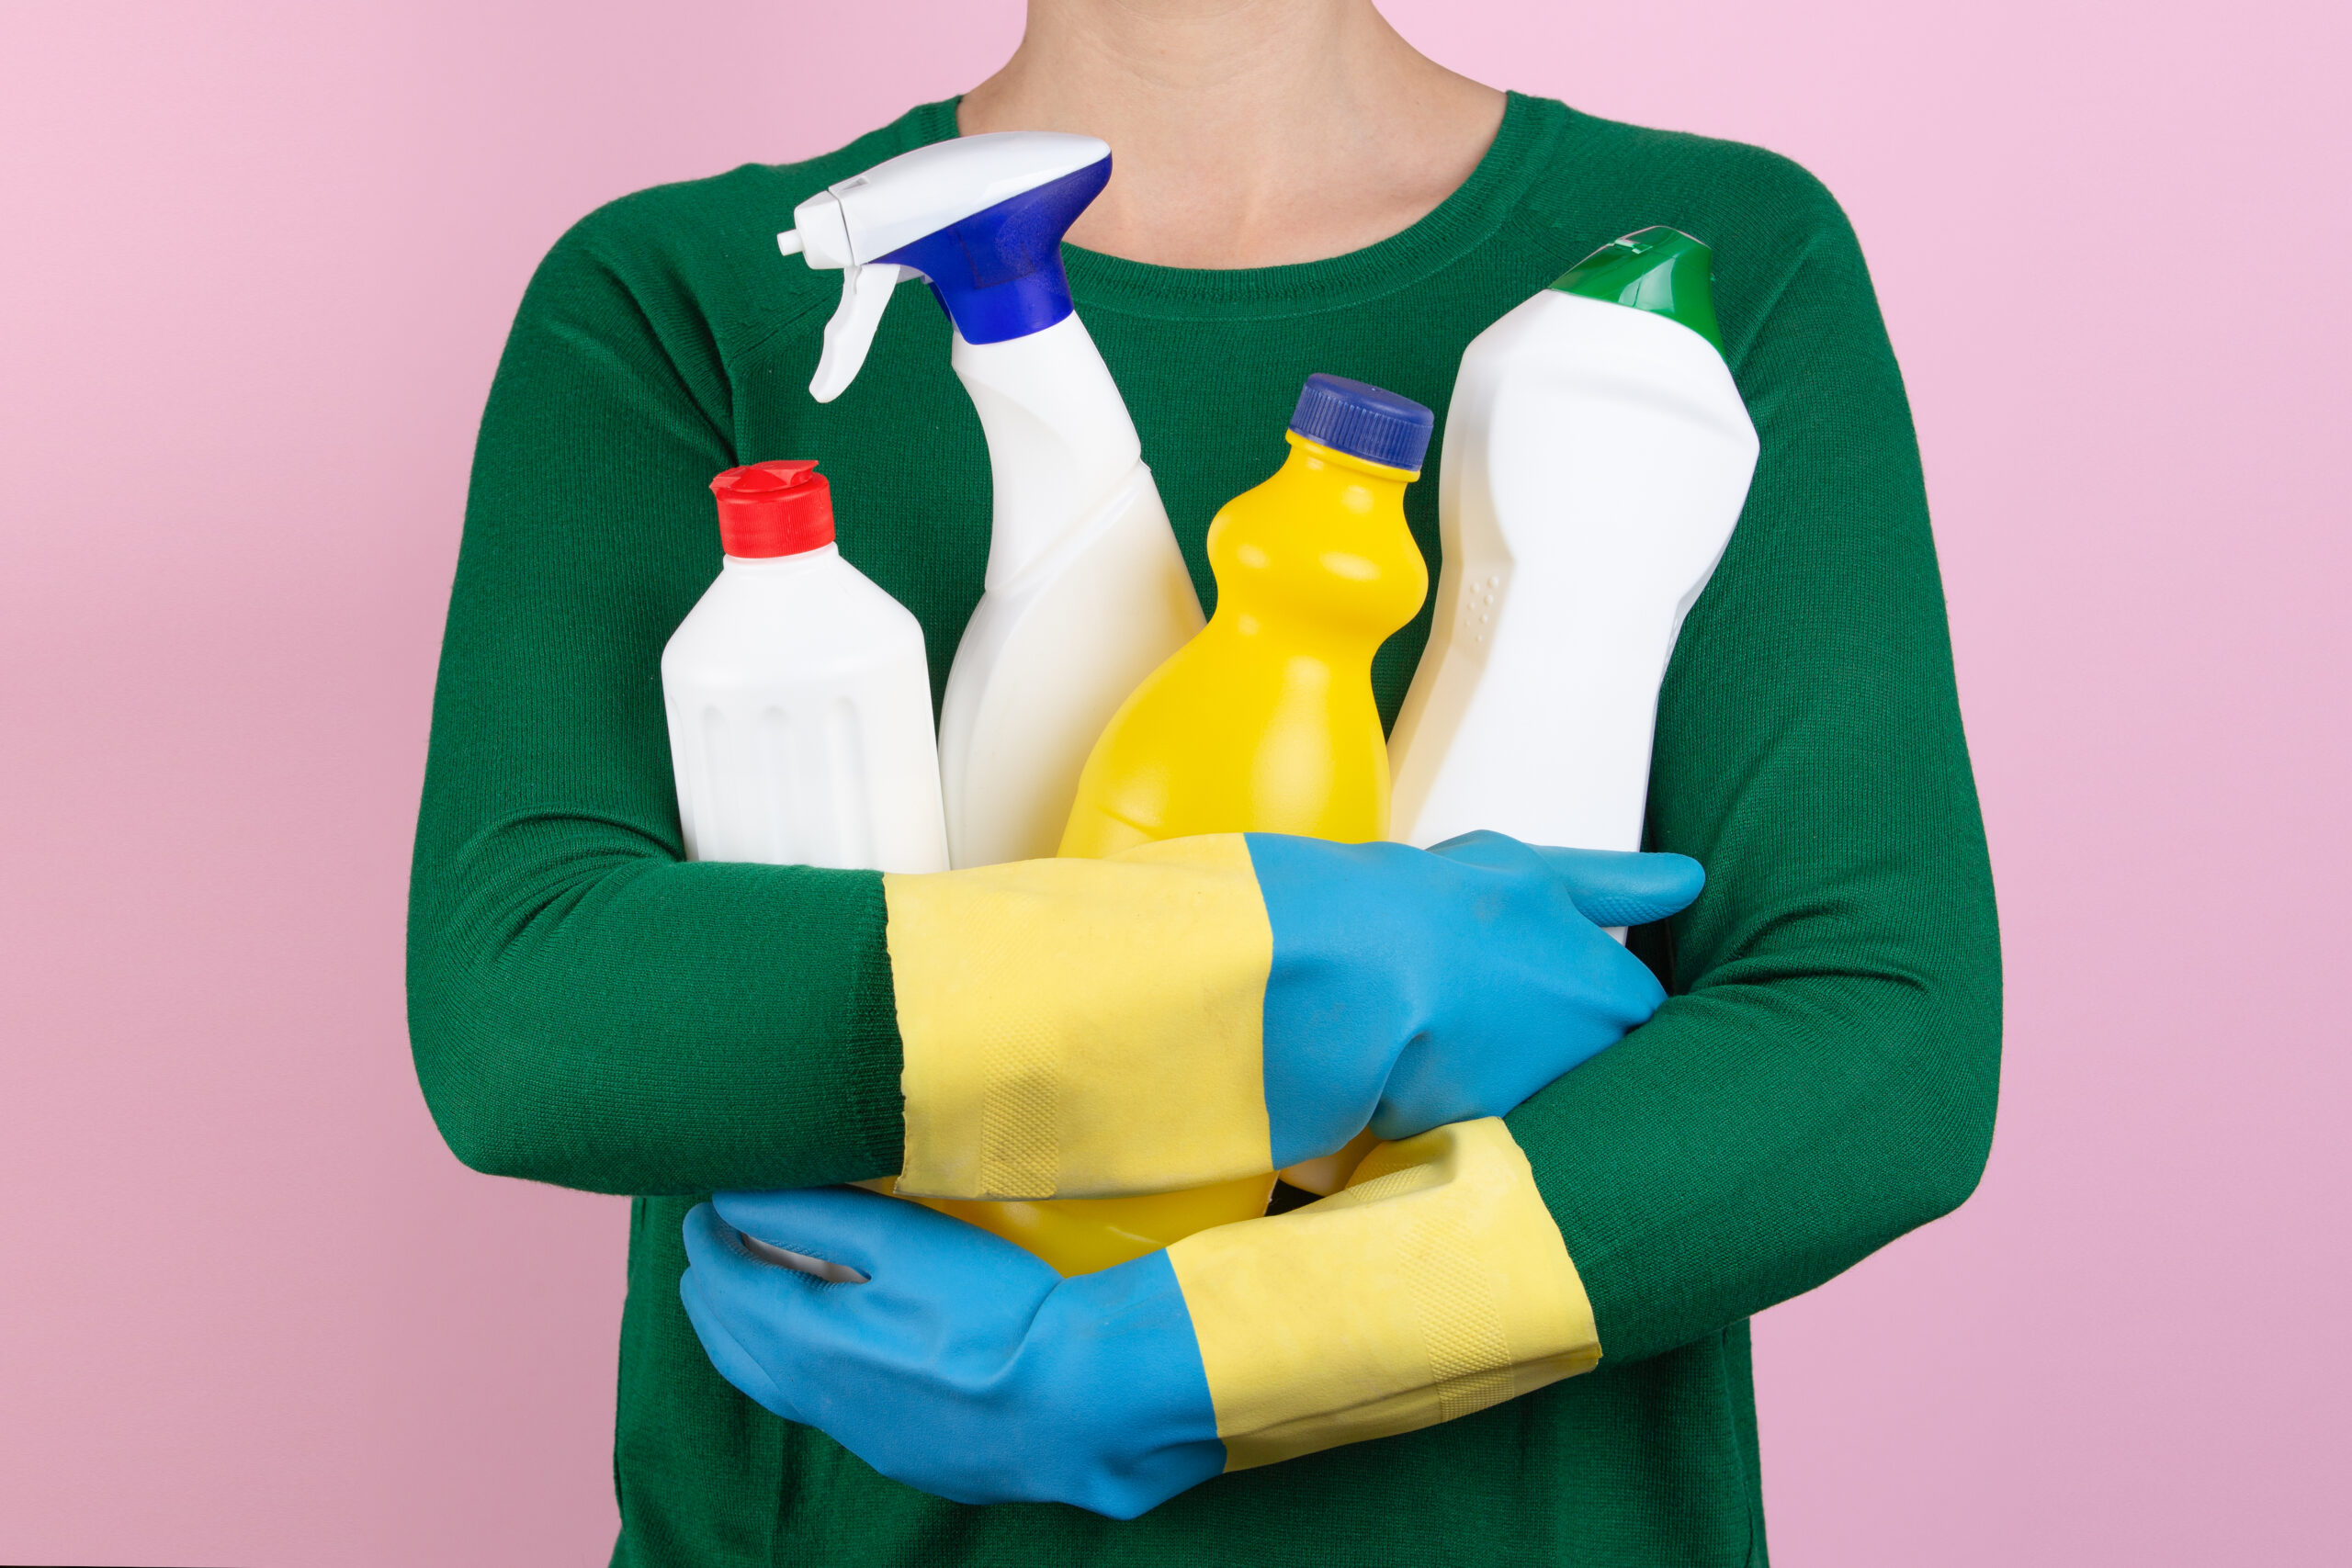 chemicals used for cleaning